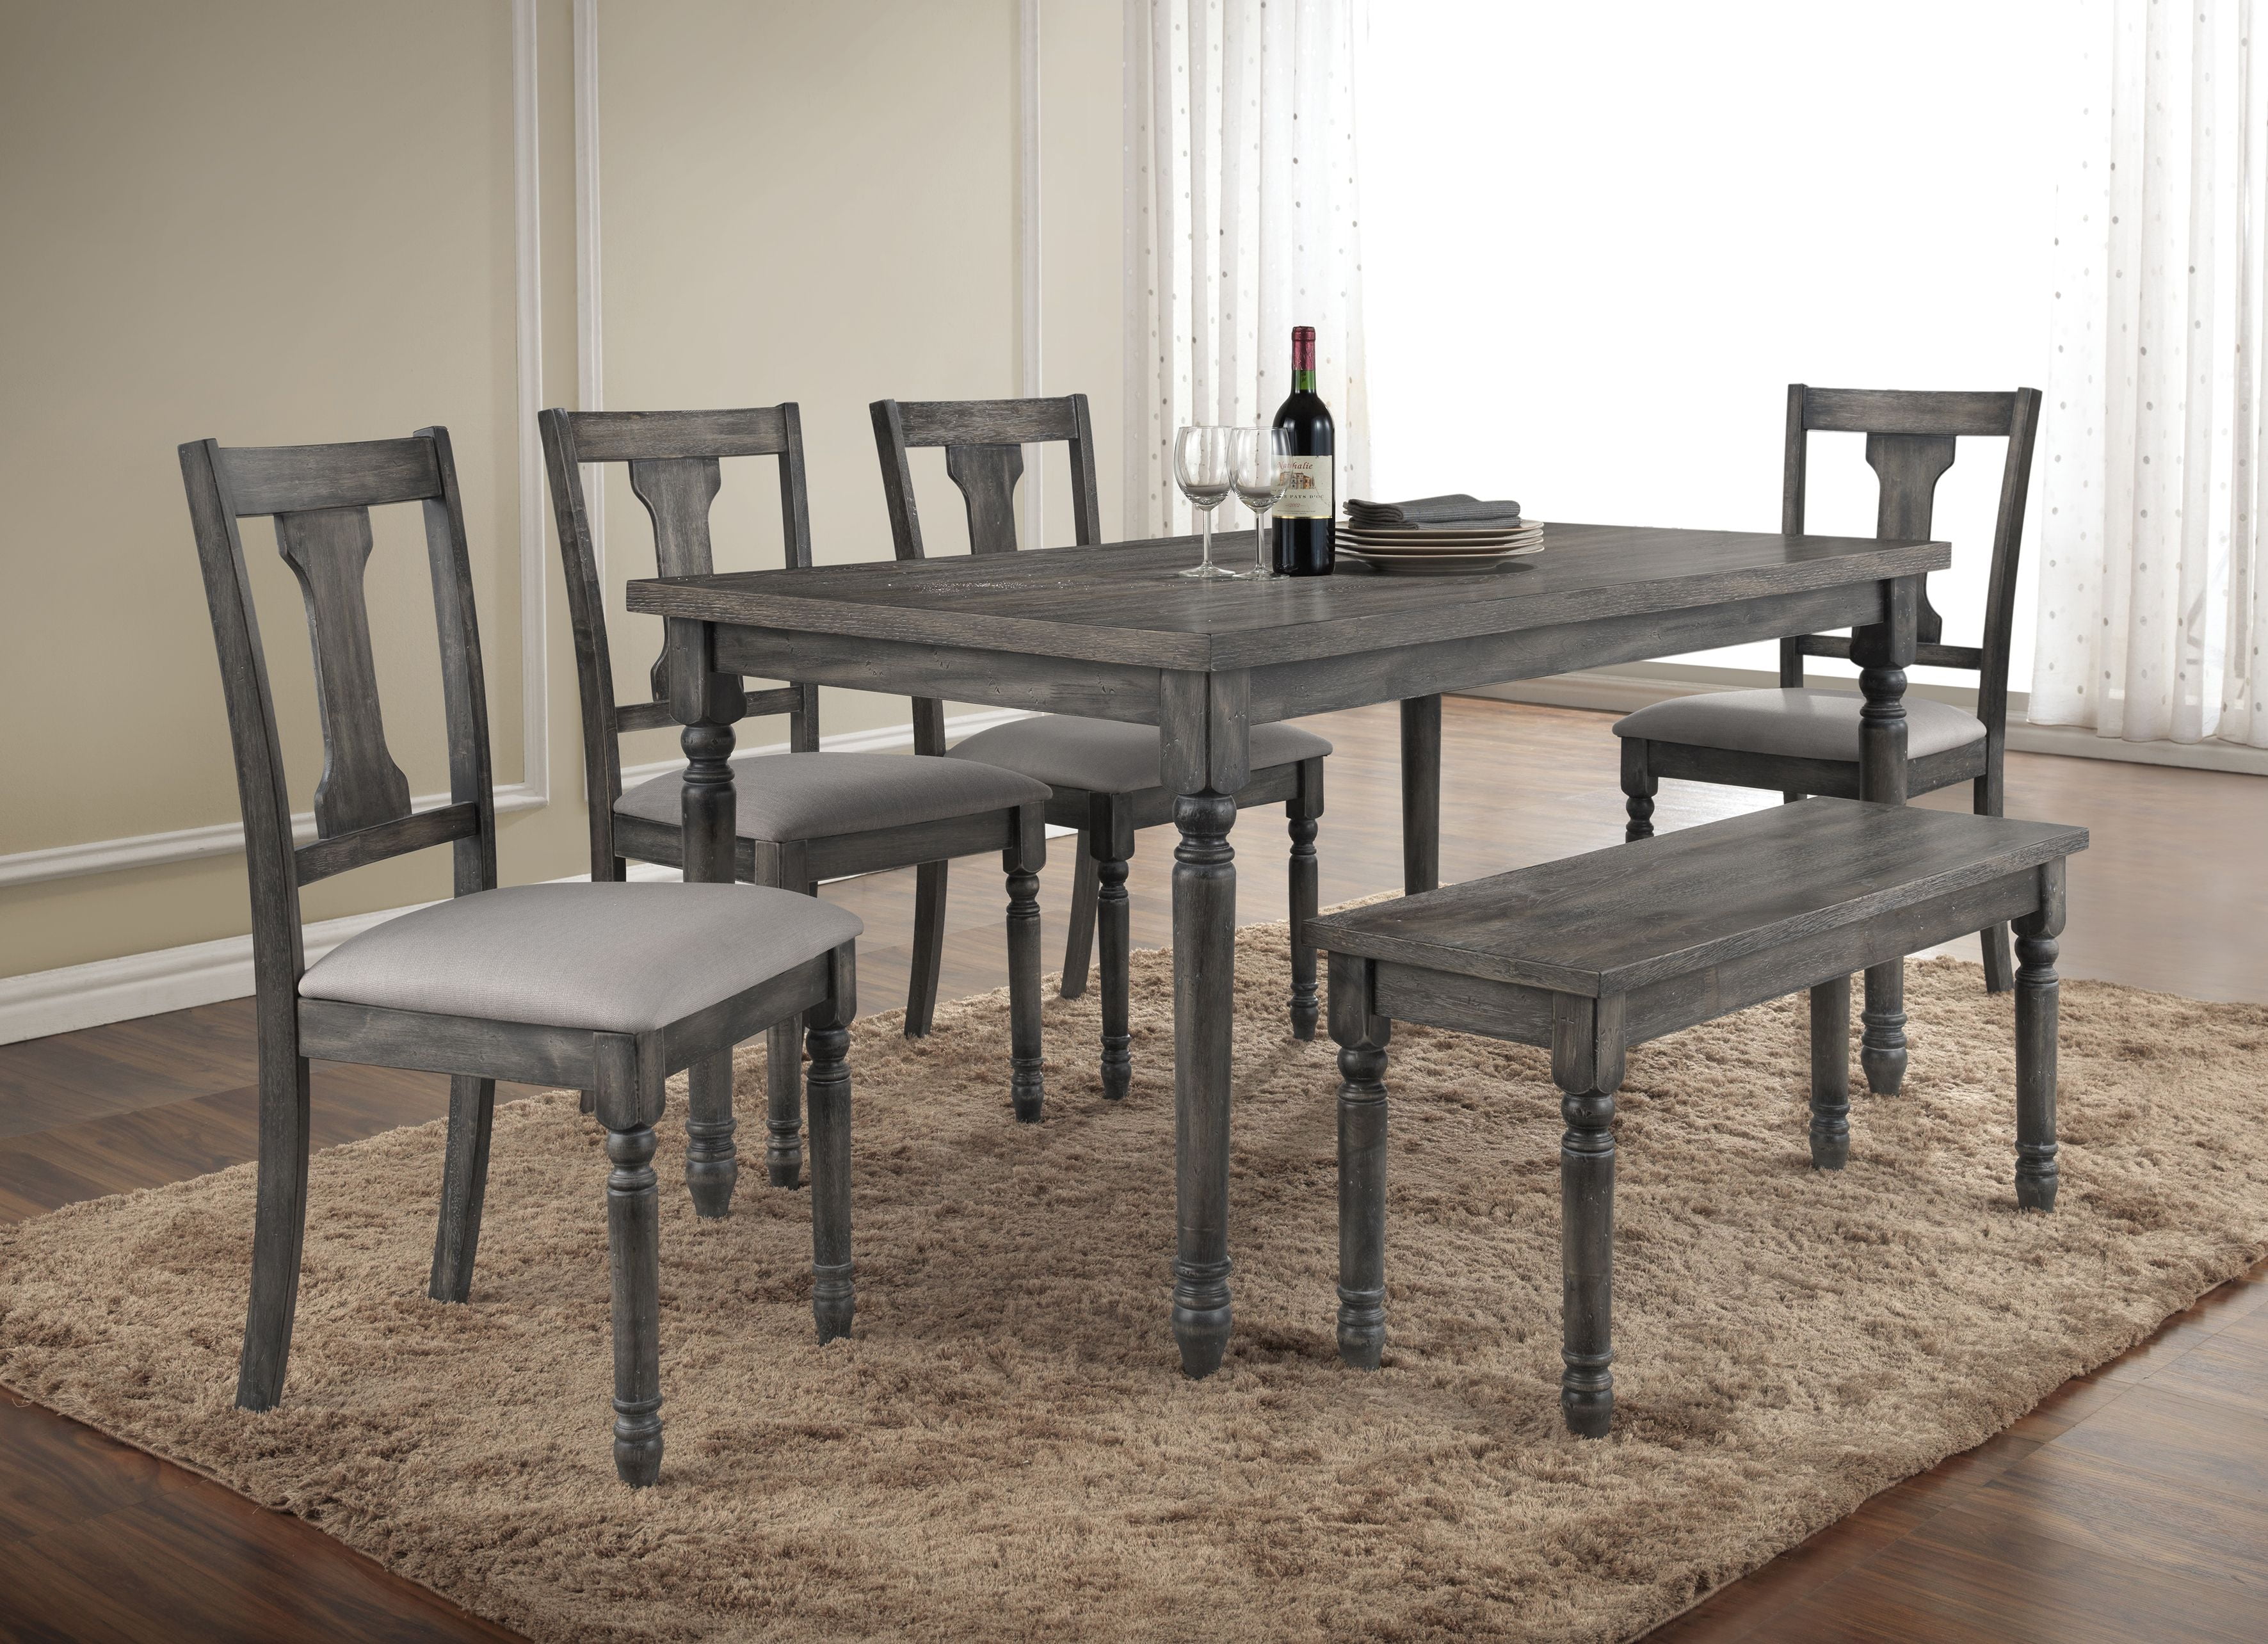 Best Master Furniture Demi 6 Piece, Meredy Dining Room Table And Chairs With Bench Set Of 6